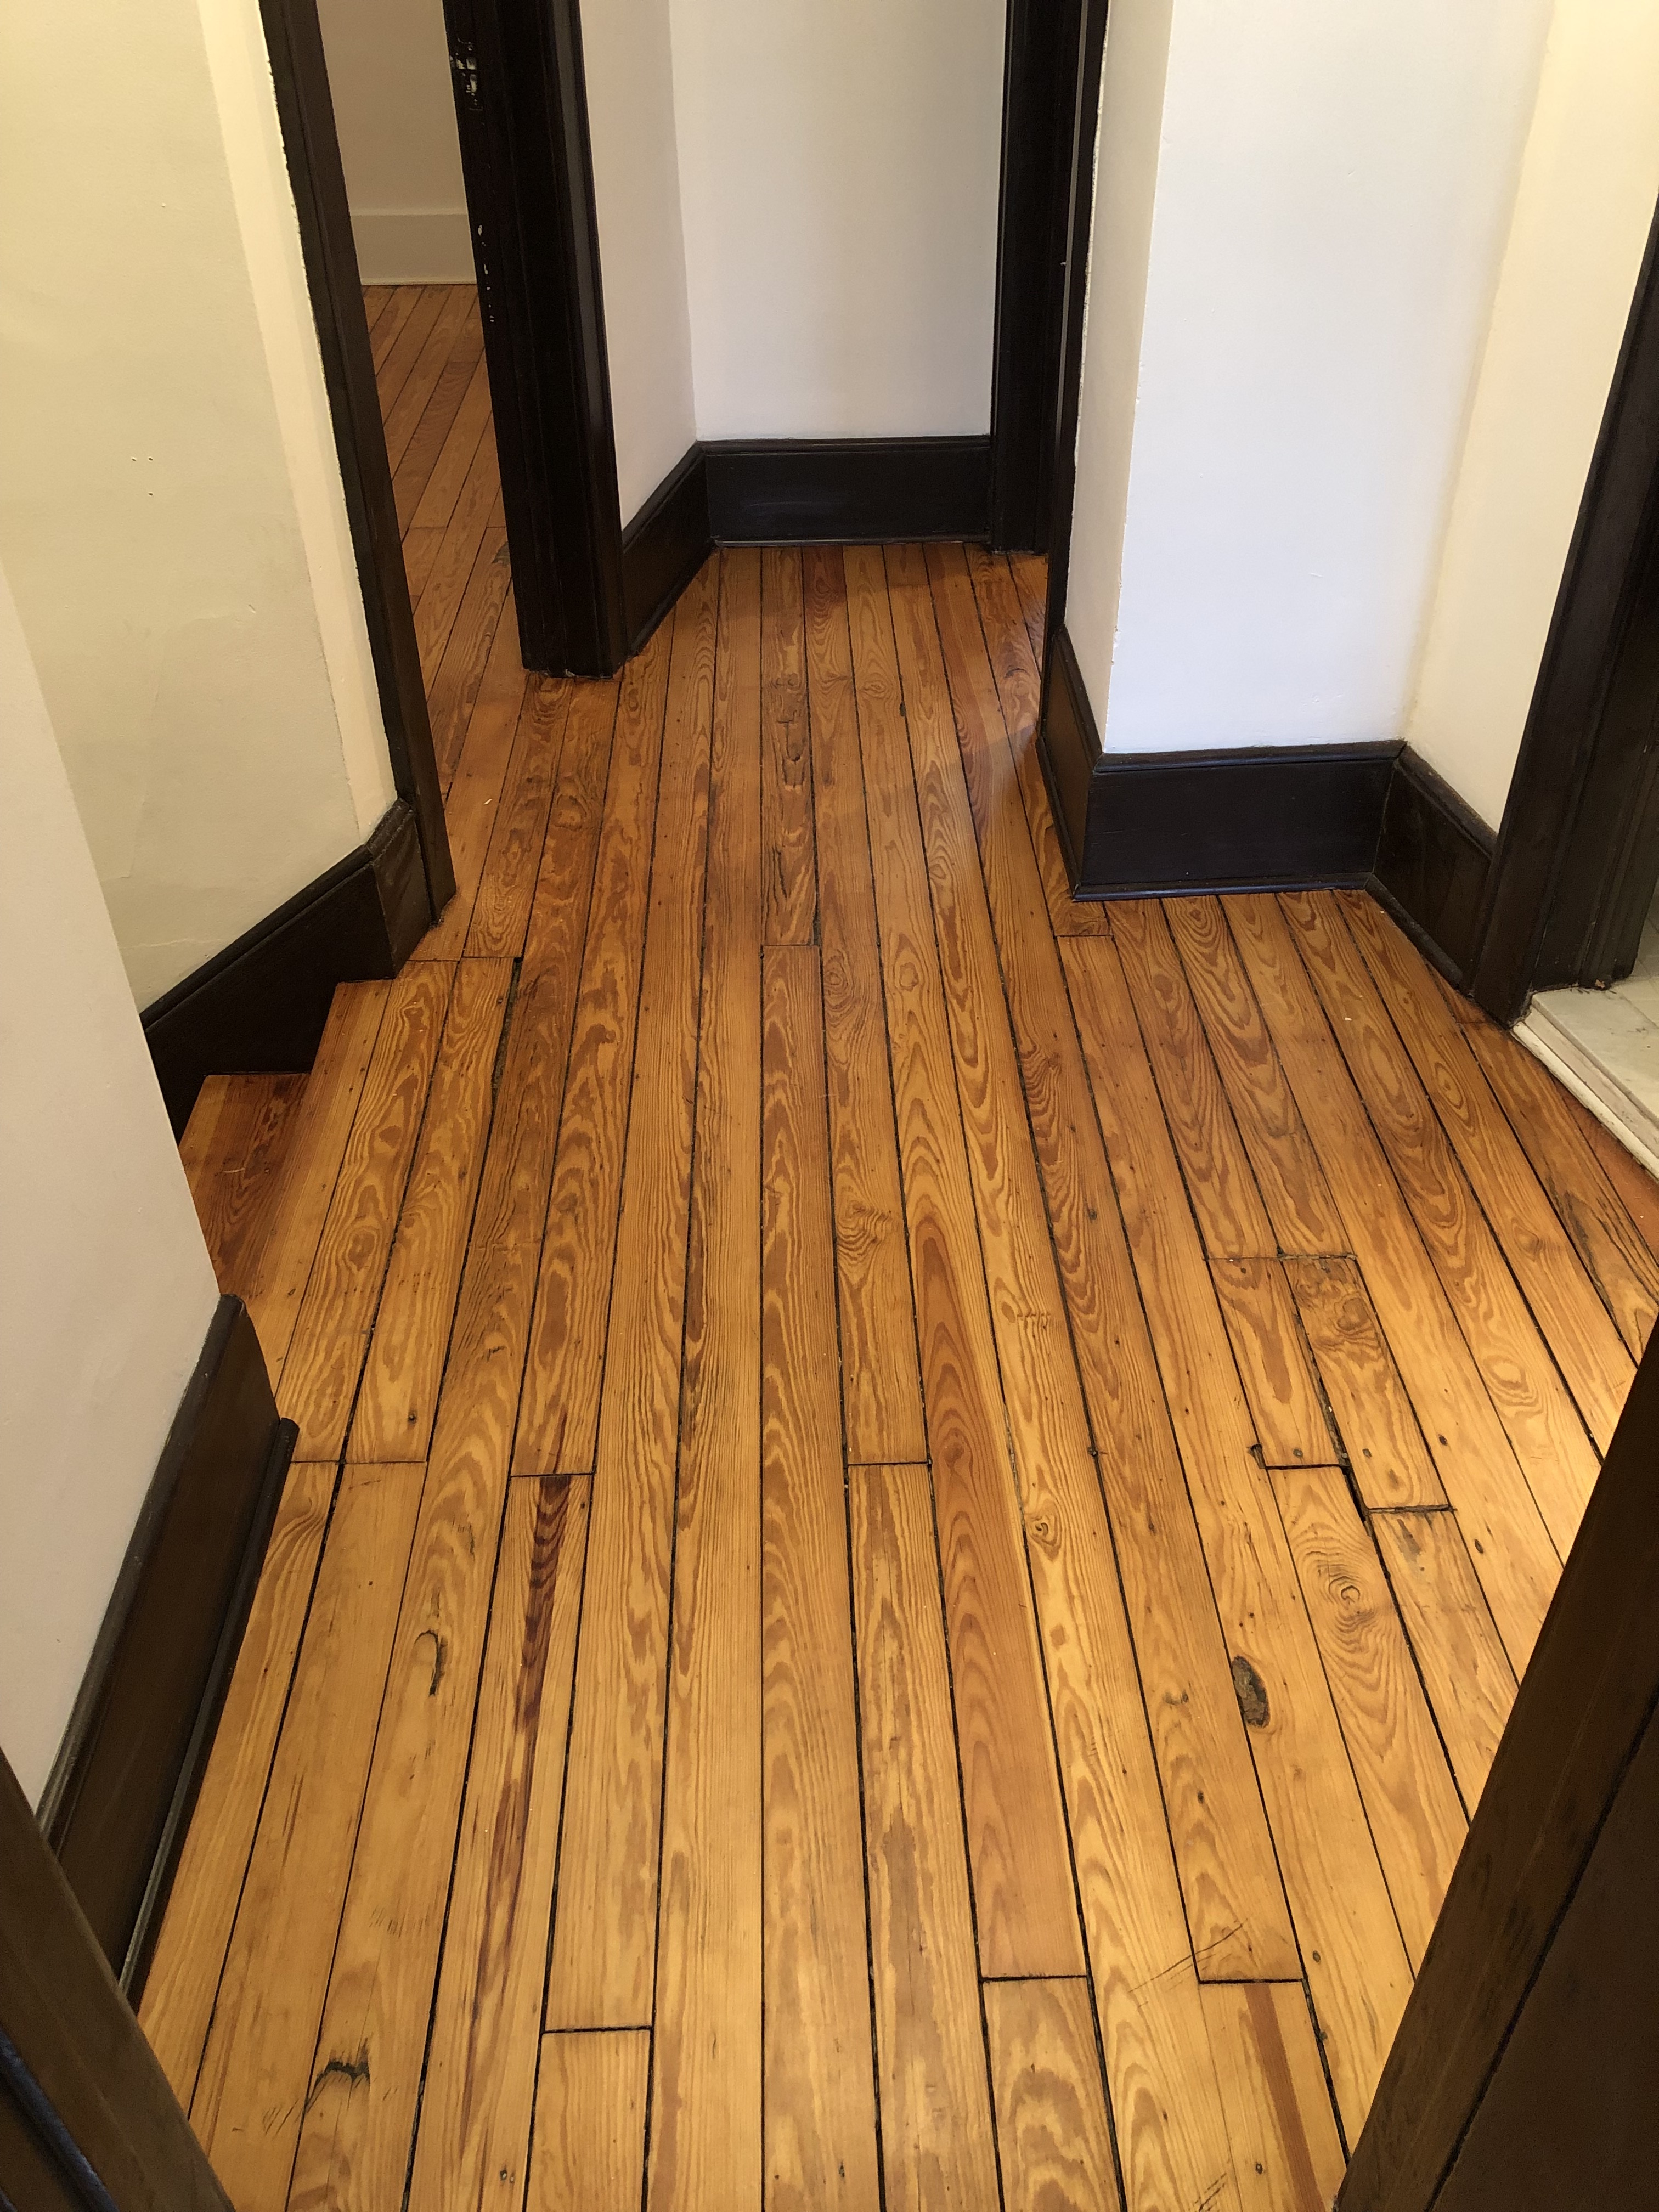 How To Refinish Hardwood Floors Step, How To Prepare Hardwood Floors For Refinishing